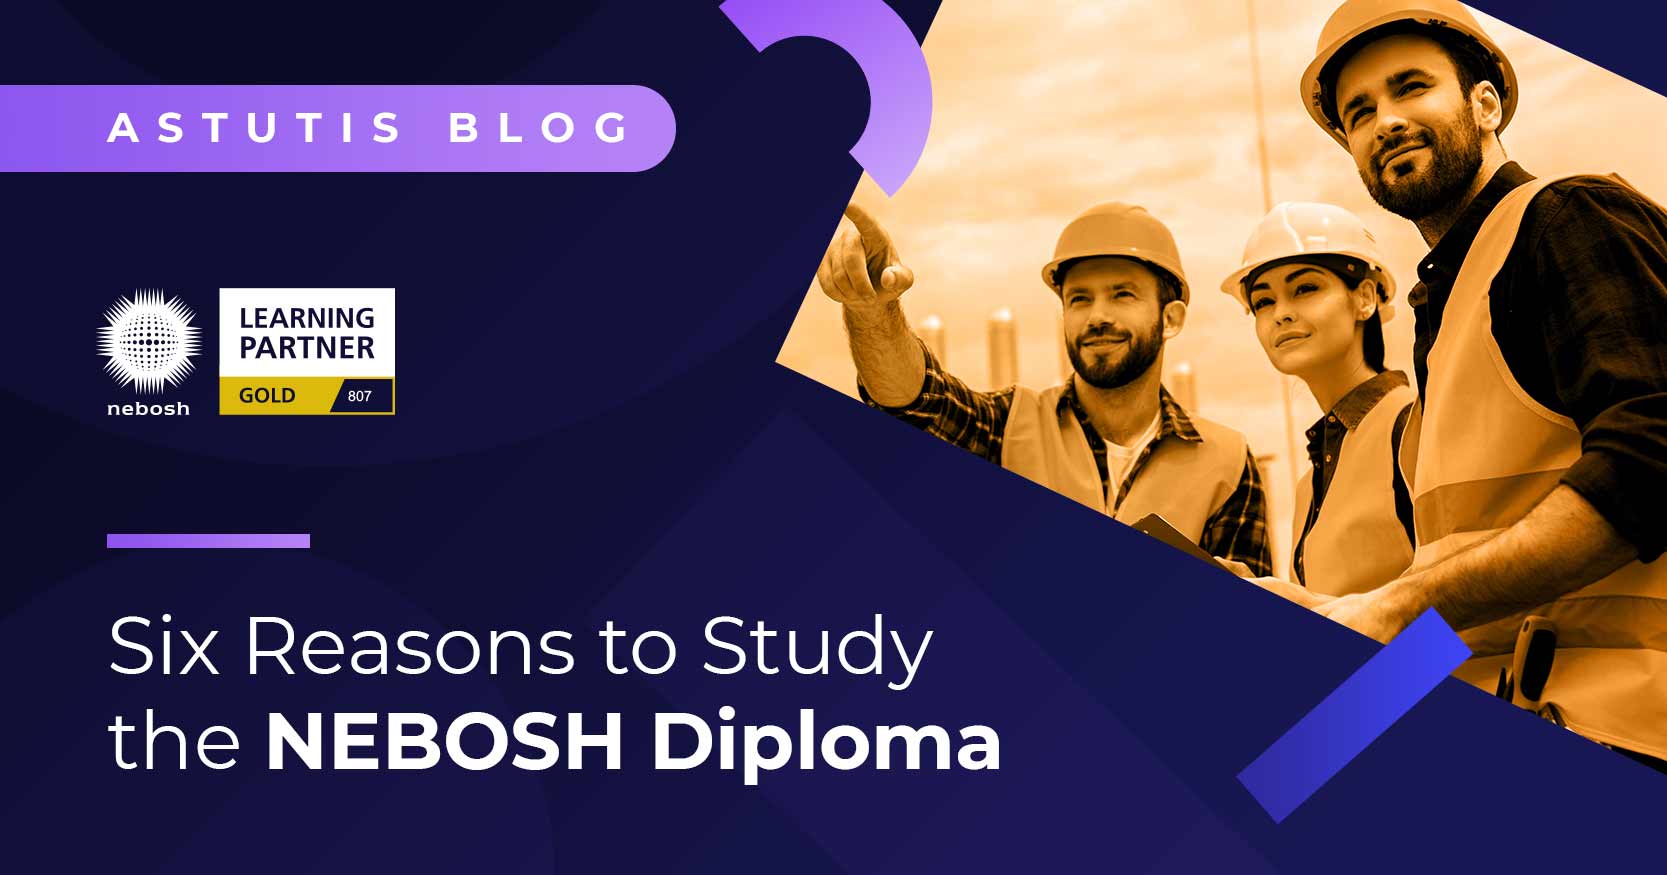 Is the NEBOSH Diploma Worth It? 6 Reasons Why You Should Take the NEBOSH Diploma Image